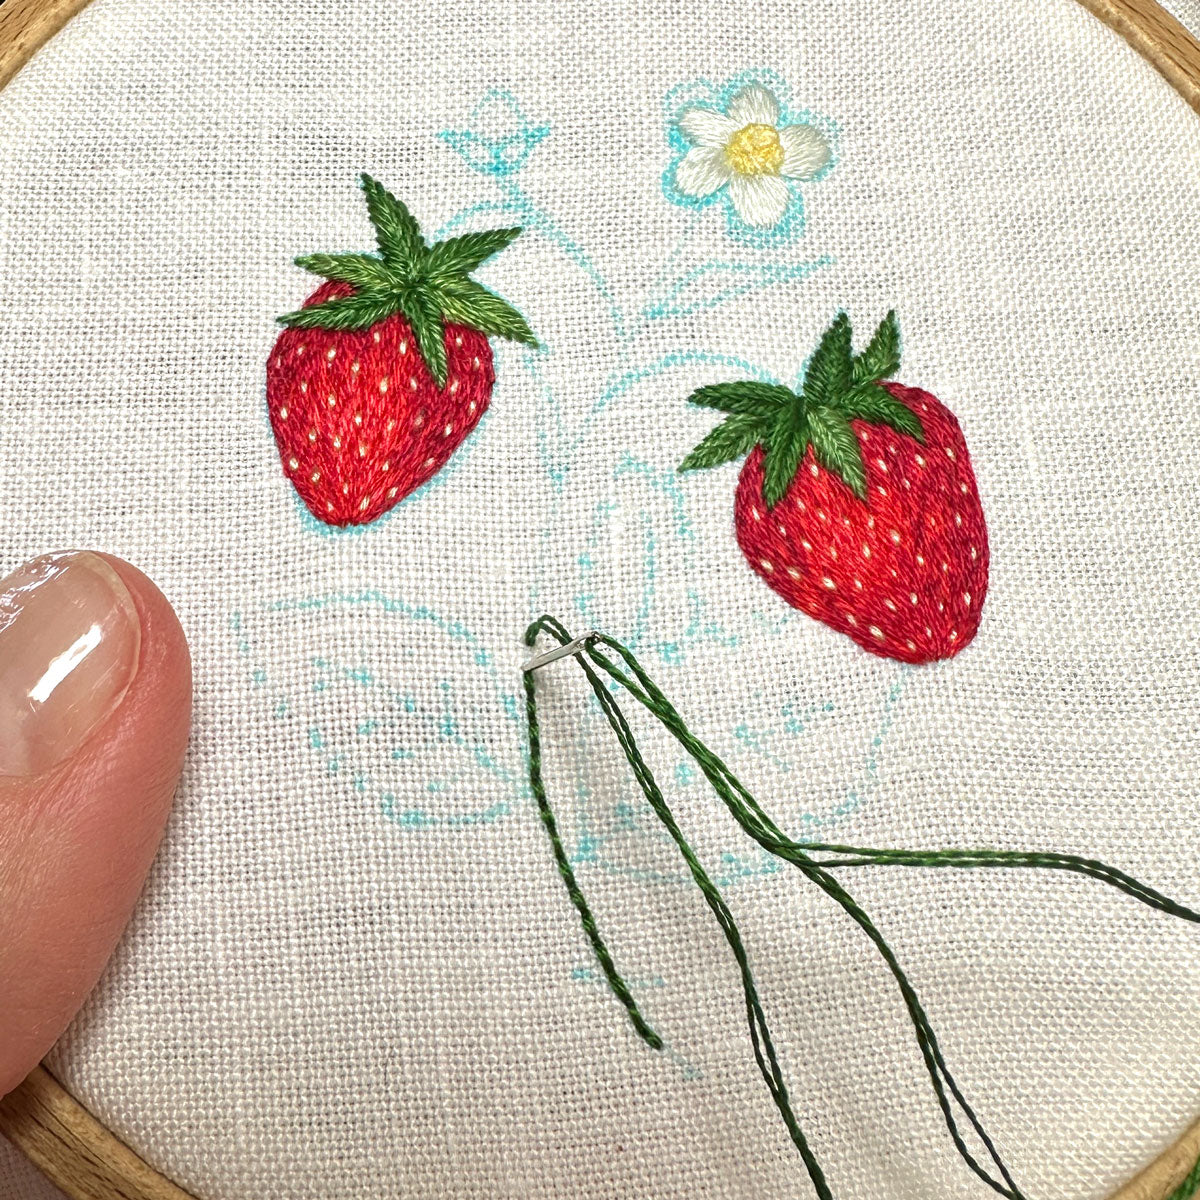 Strawberry Plant on White Linen Hand Embroidered Art